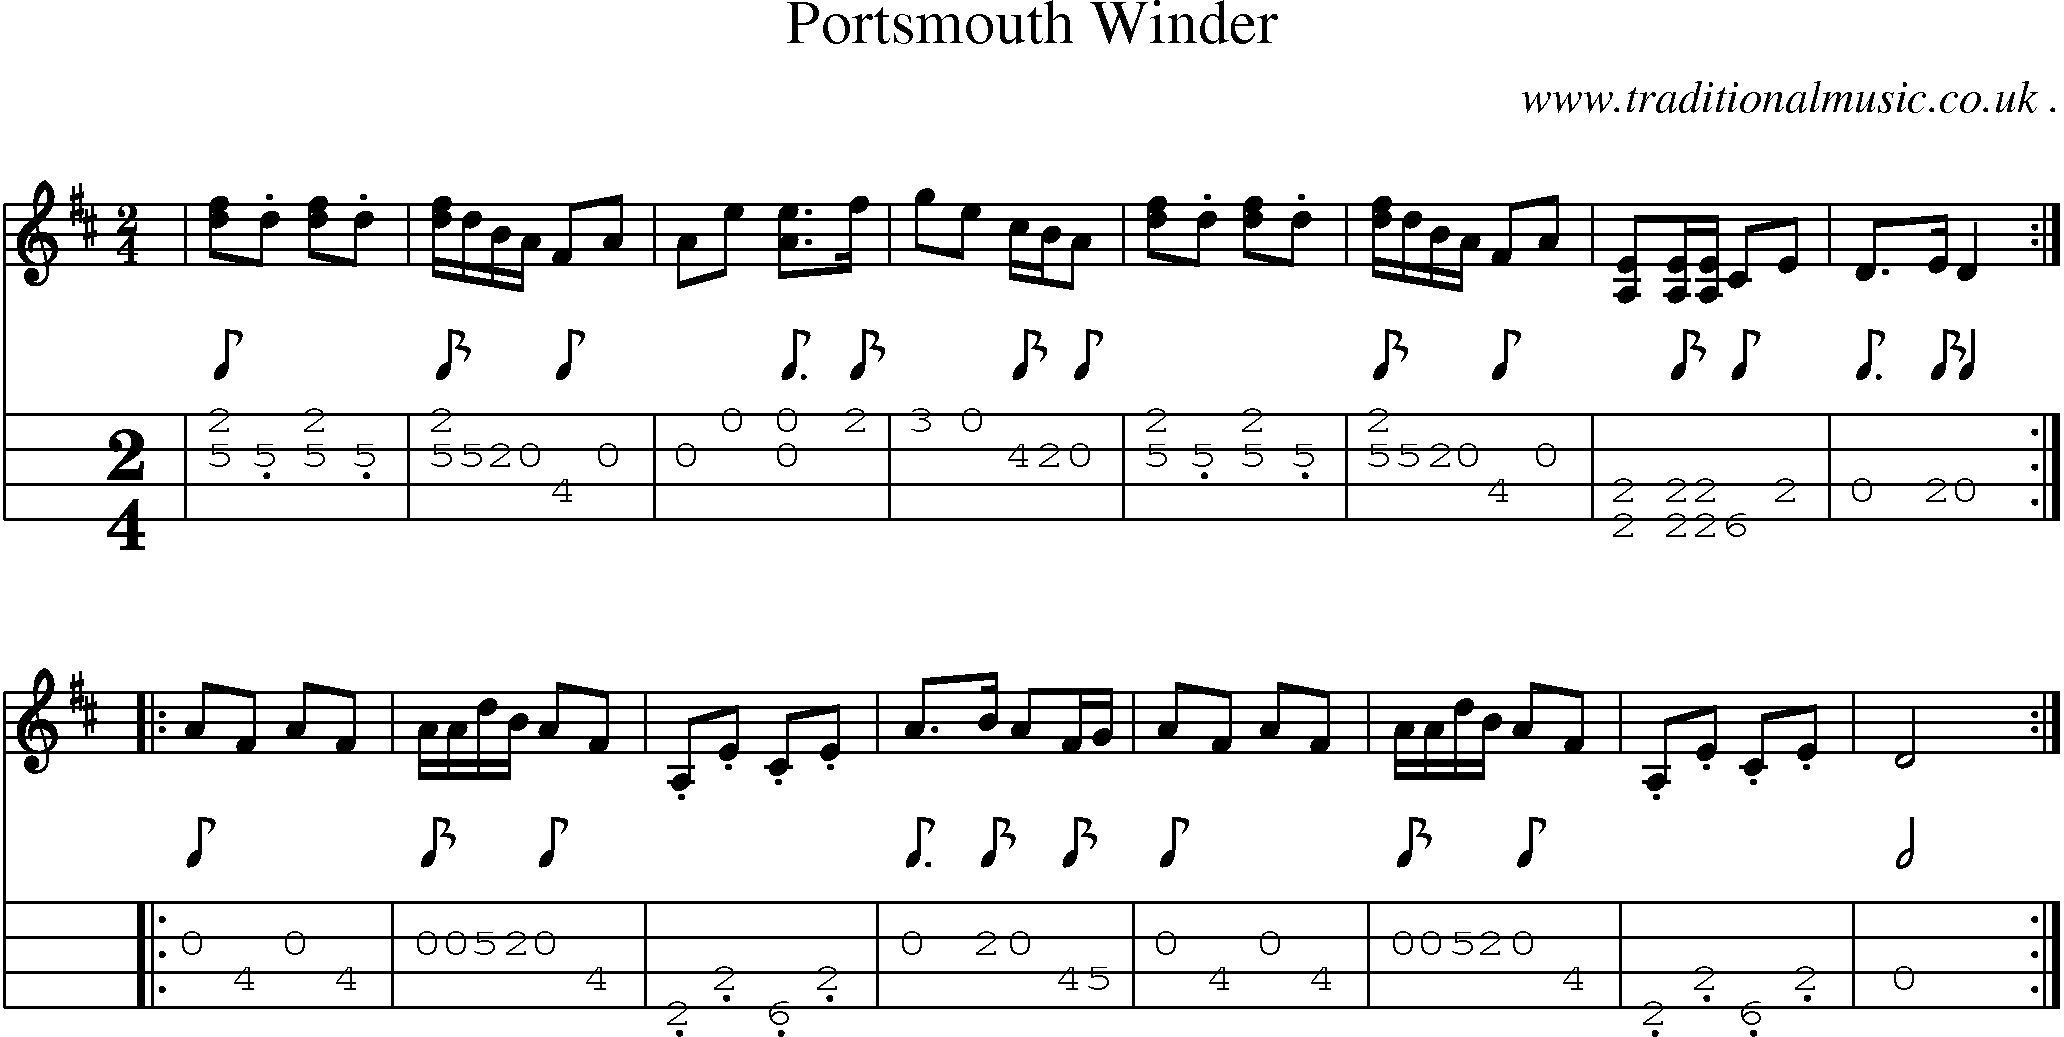 Music Score and Mandolin Tabs for Portsmouth Winder